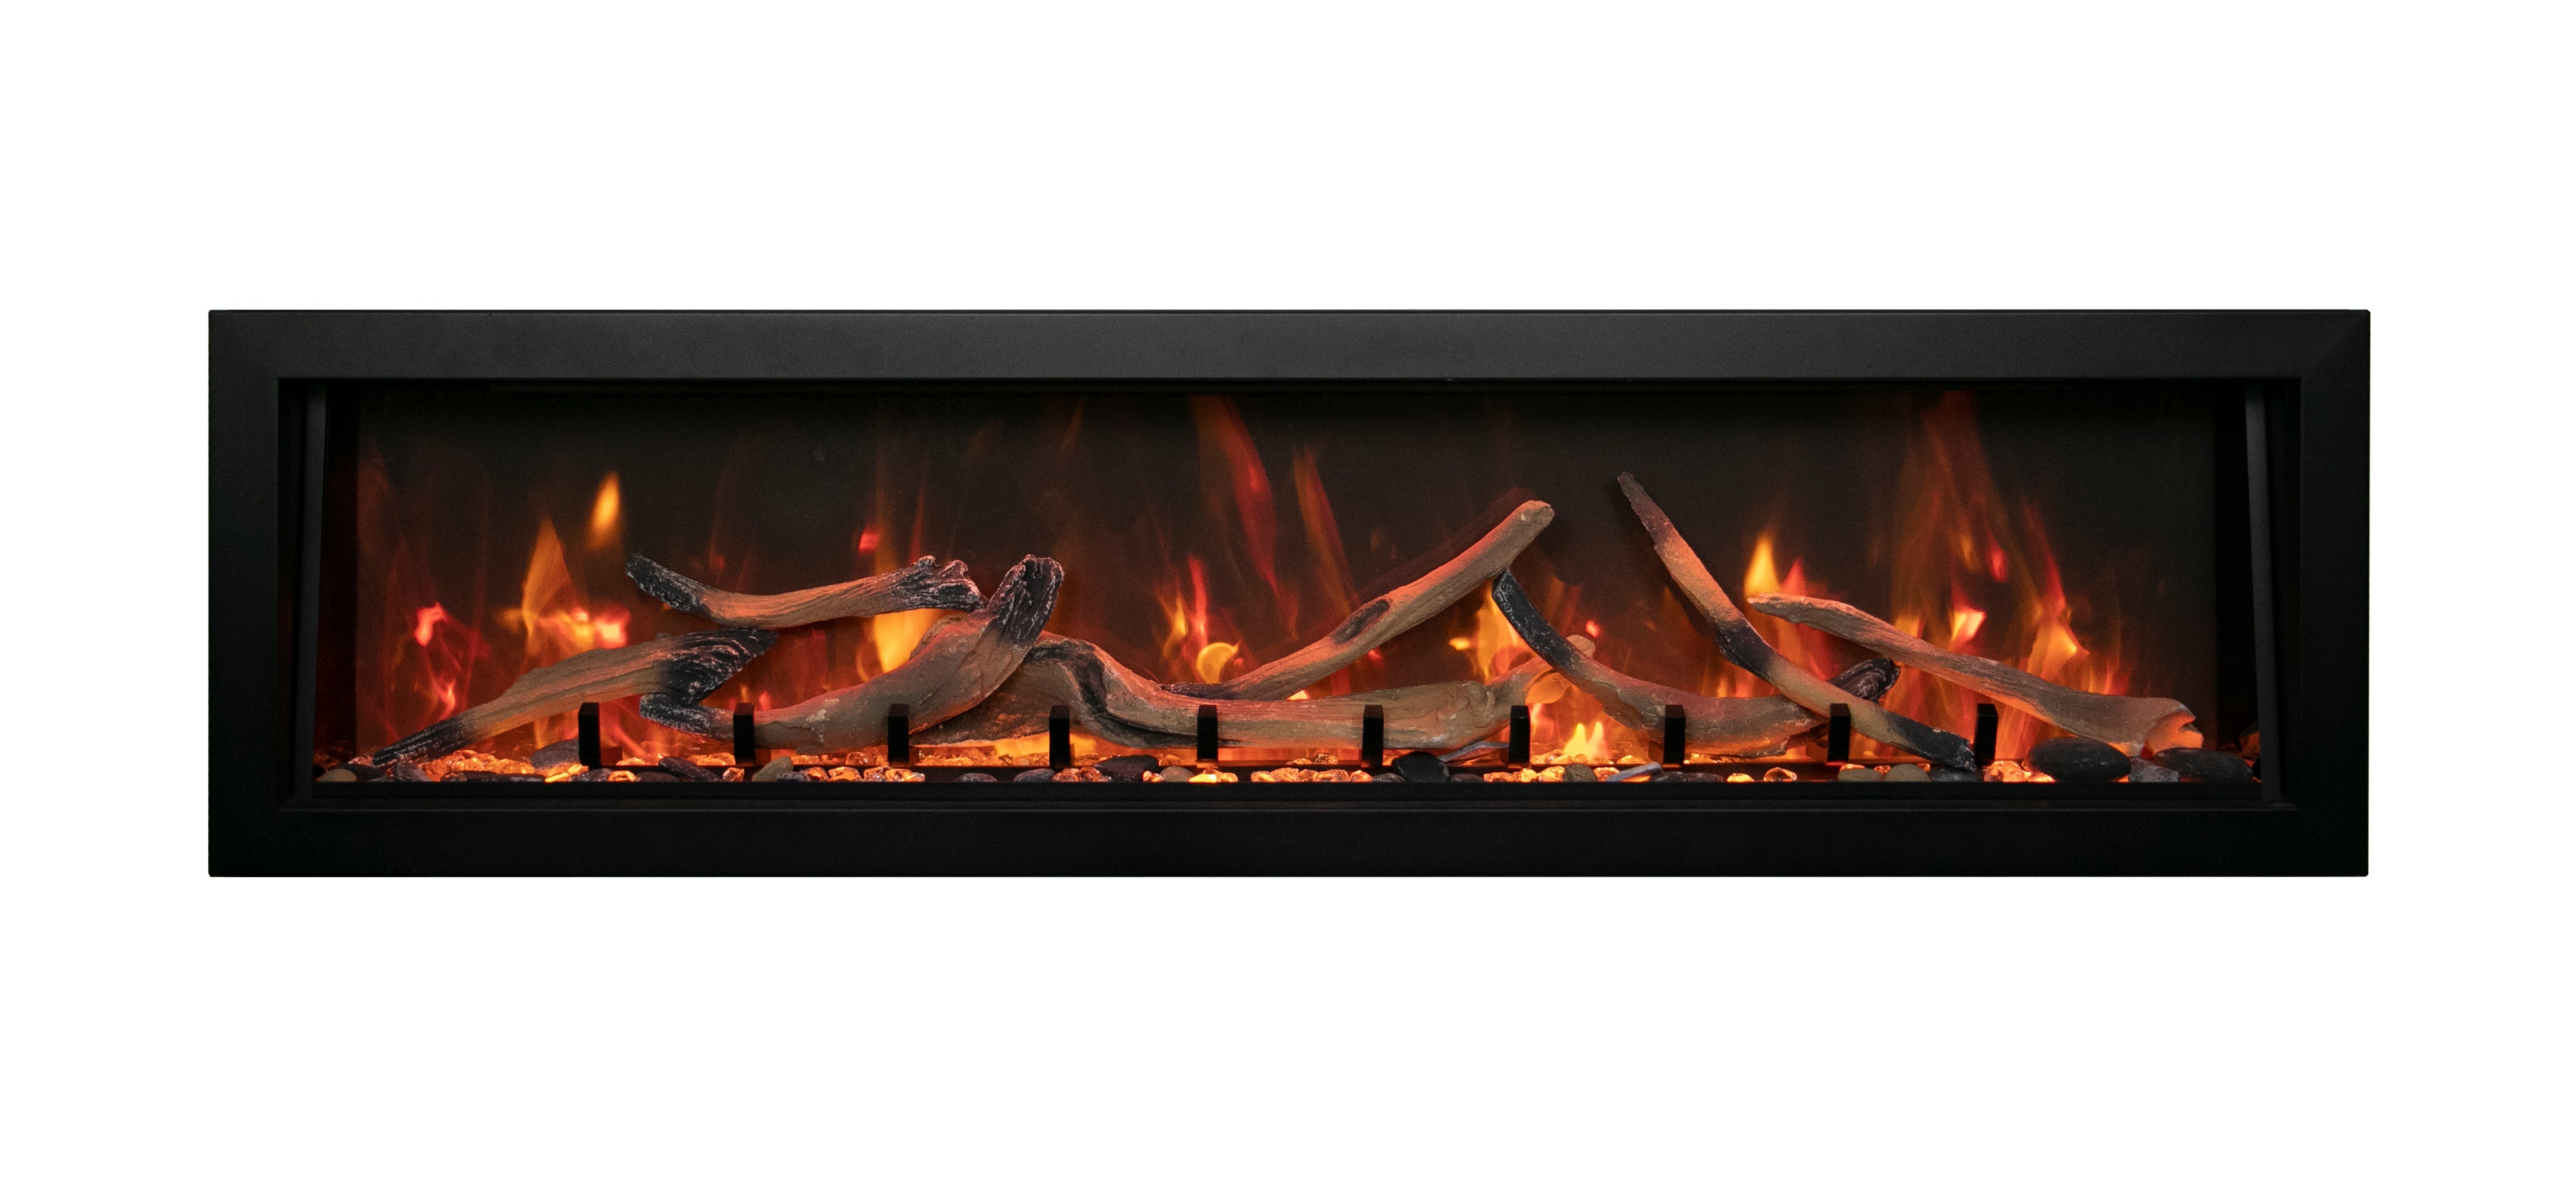 Amantii 60" Panorama Deep Indoor or Outdoor Electric Fireplace -BI-60-DEEP-OD- Front View With Logs With Yellow and Orange Flames